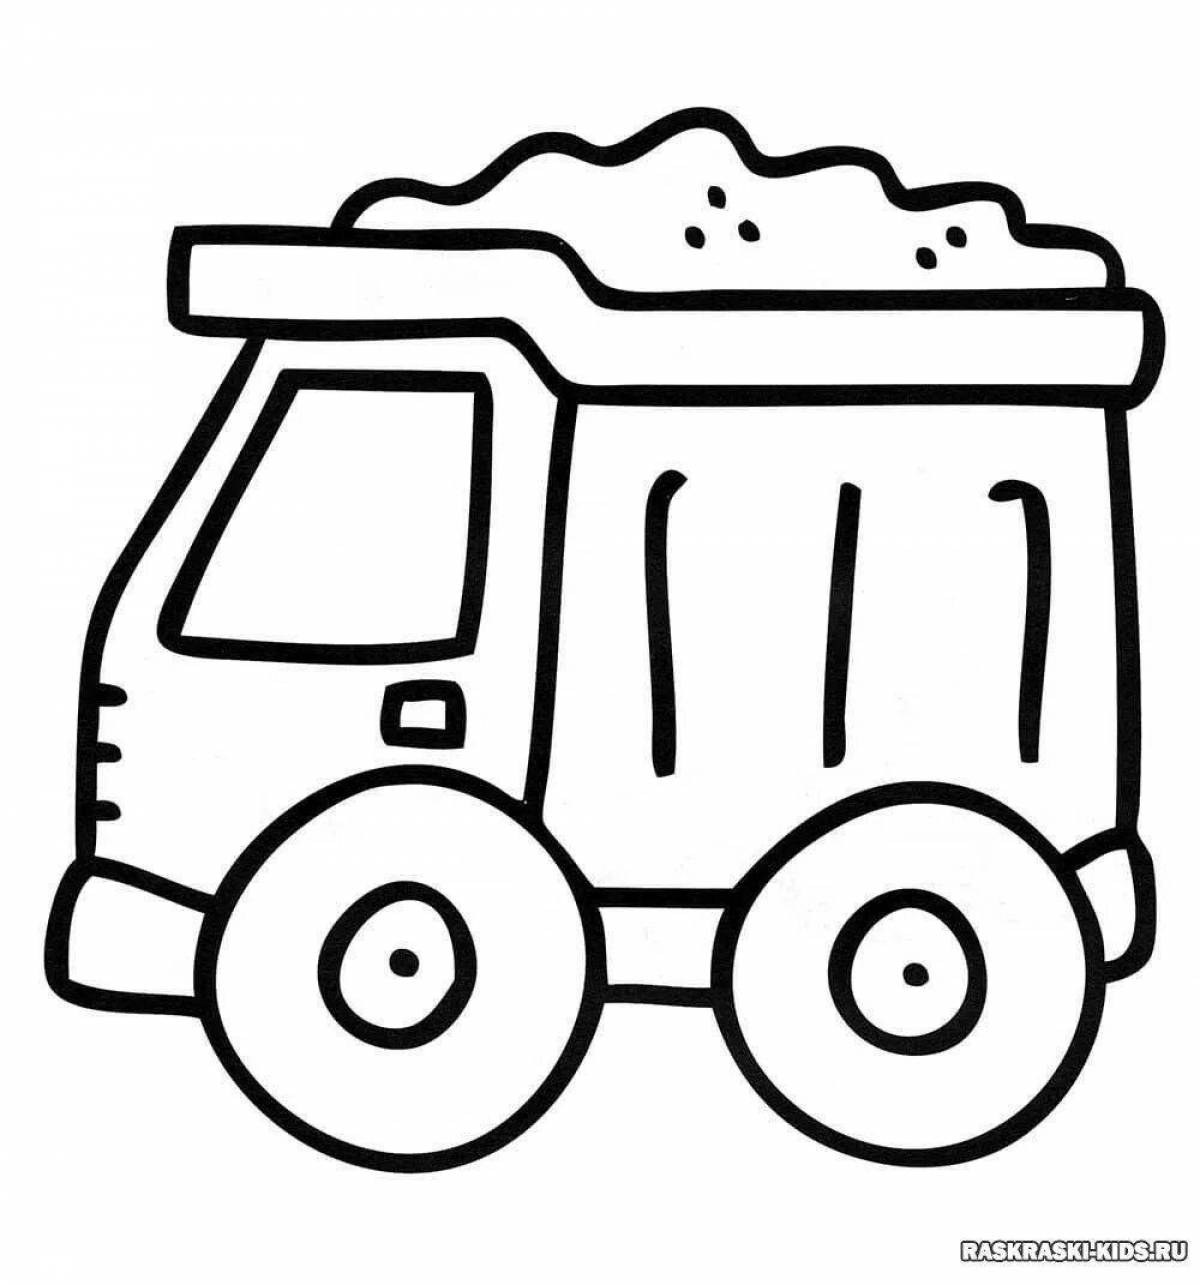 Exciting cars 3 coloring pages for boys